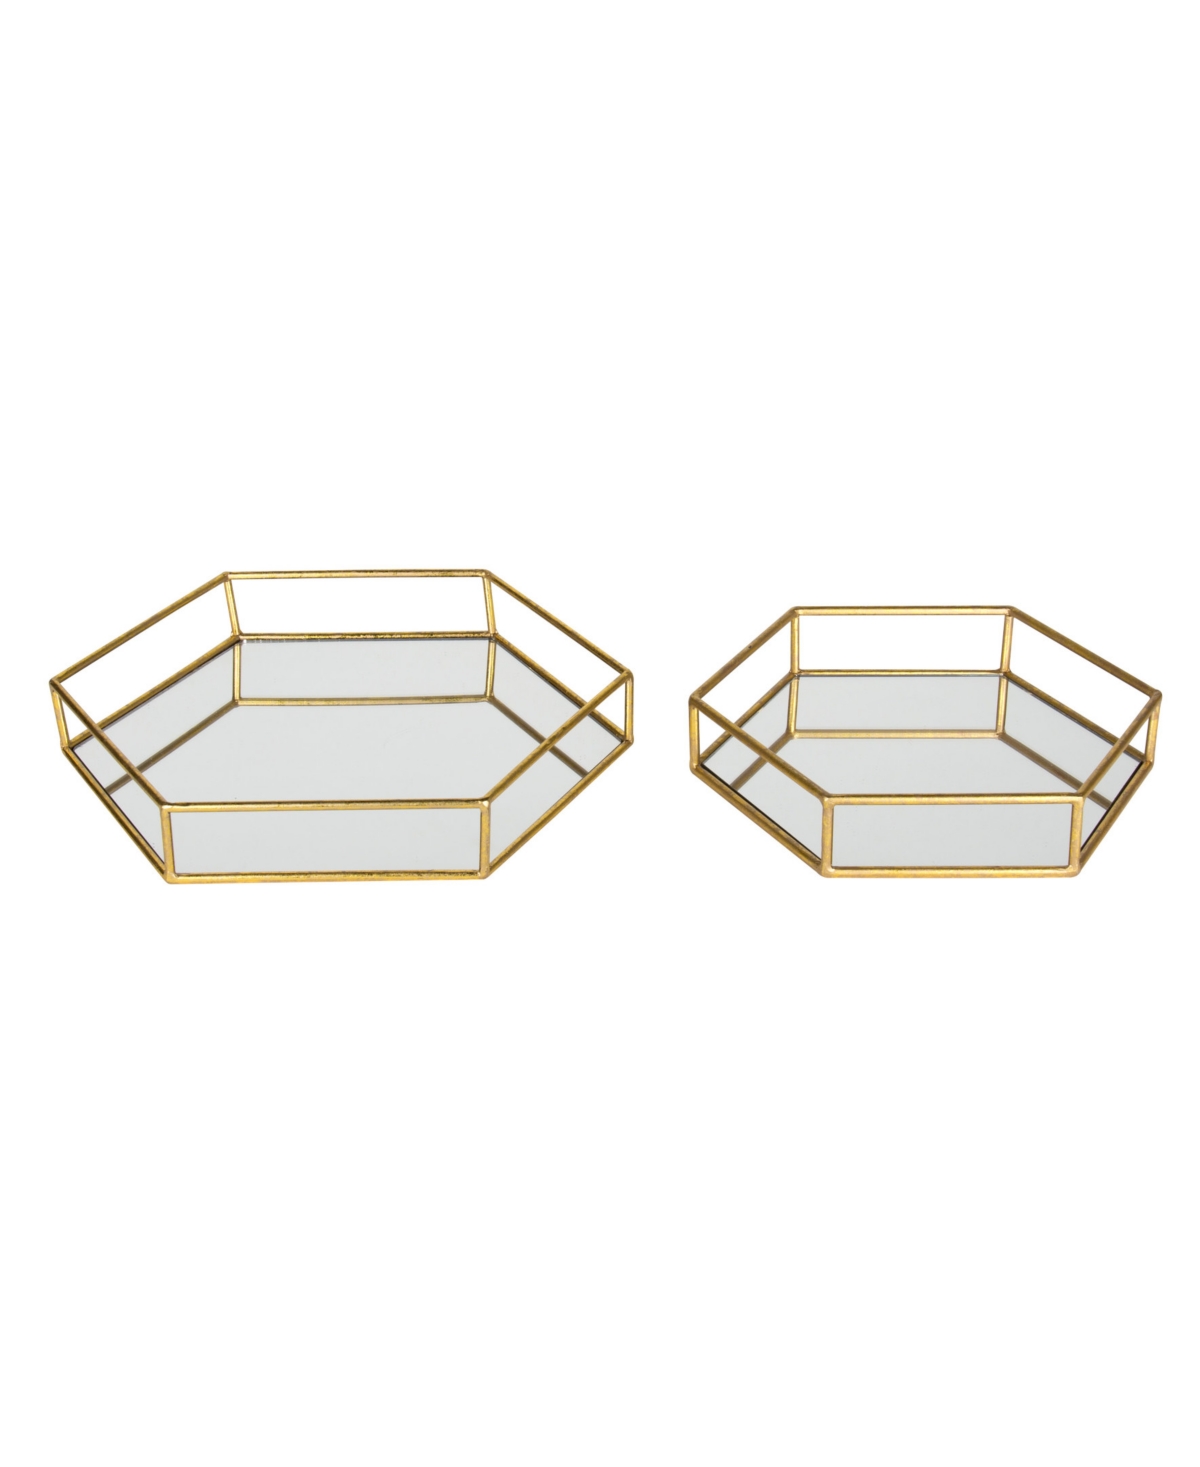 Kate And Laurel Felicia Nesting Metal Mirrored Decorative Trays, 2 Piece In Gold